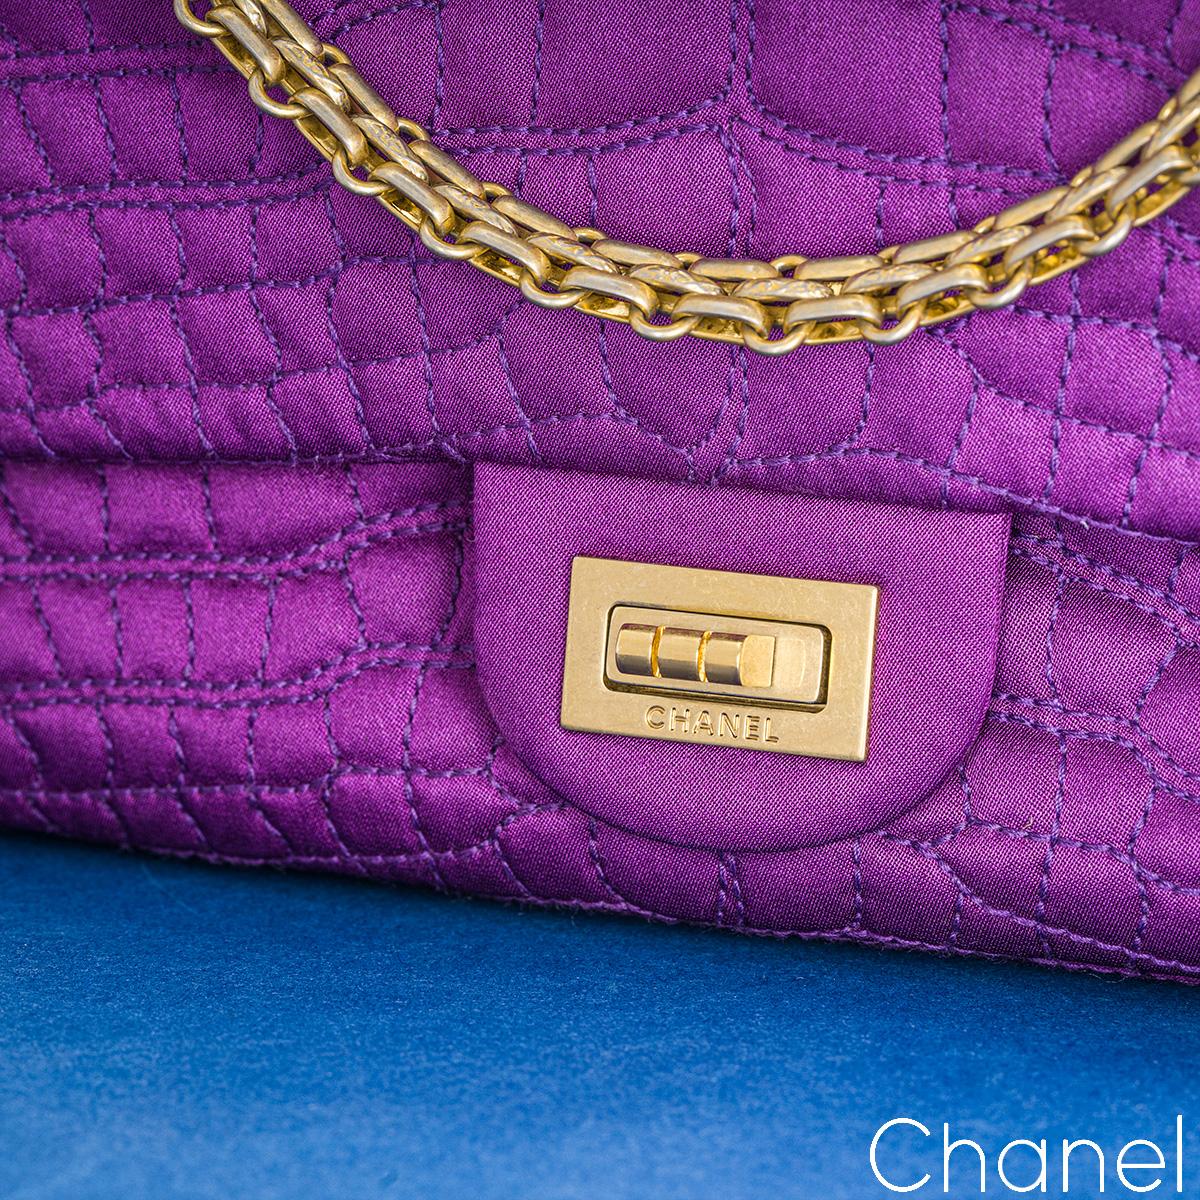 Chanel Purple Satin 2.55 Reissue Small 255 Bag For Sale 5